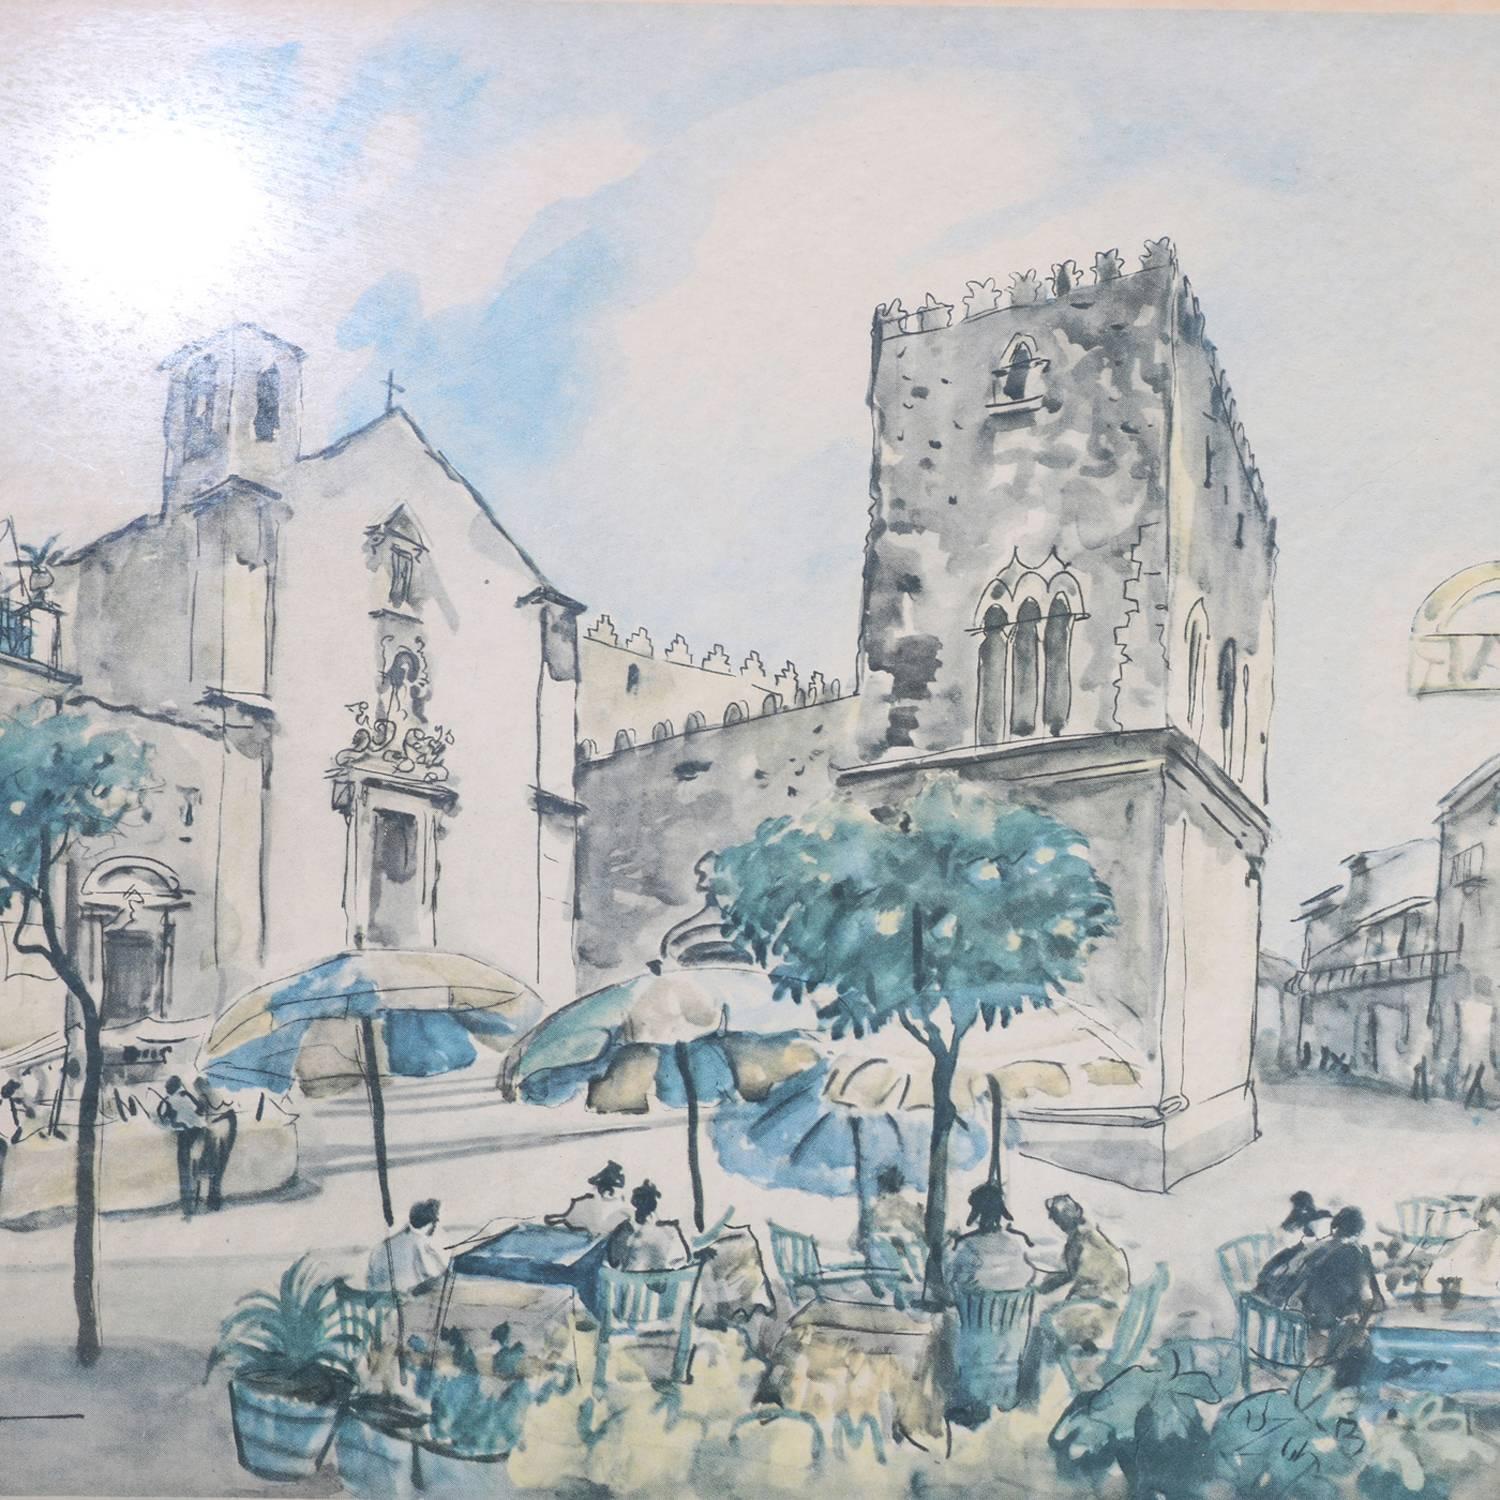 Italian framed street scene prints after original watercolors by Mario Carraro (1896-1978), one identified as
